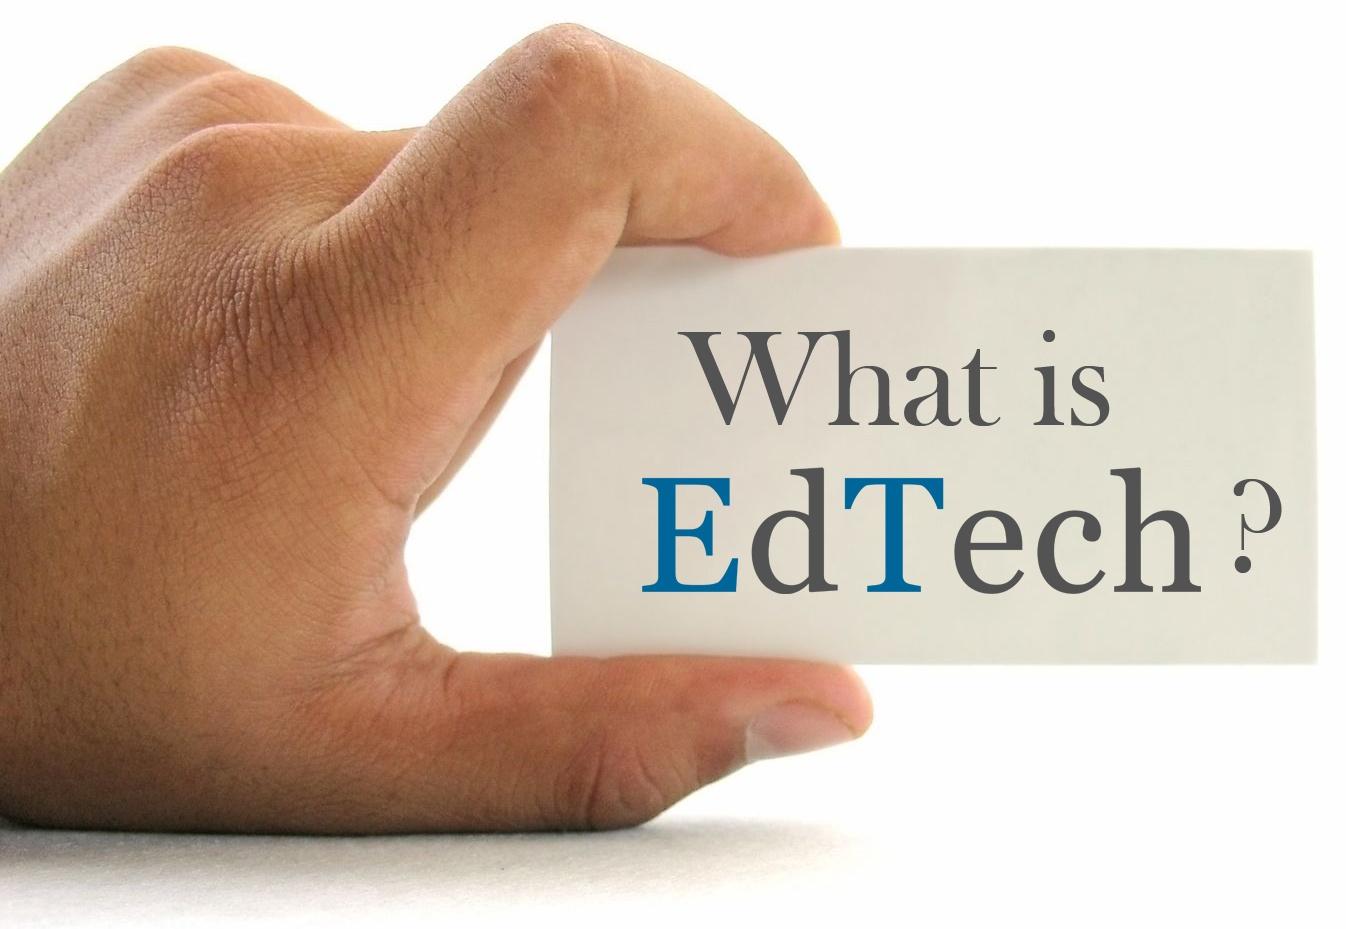 what is edtech?